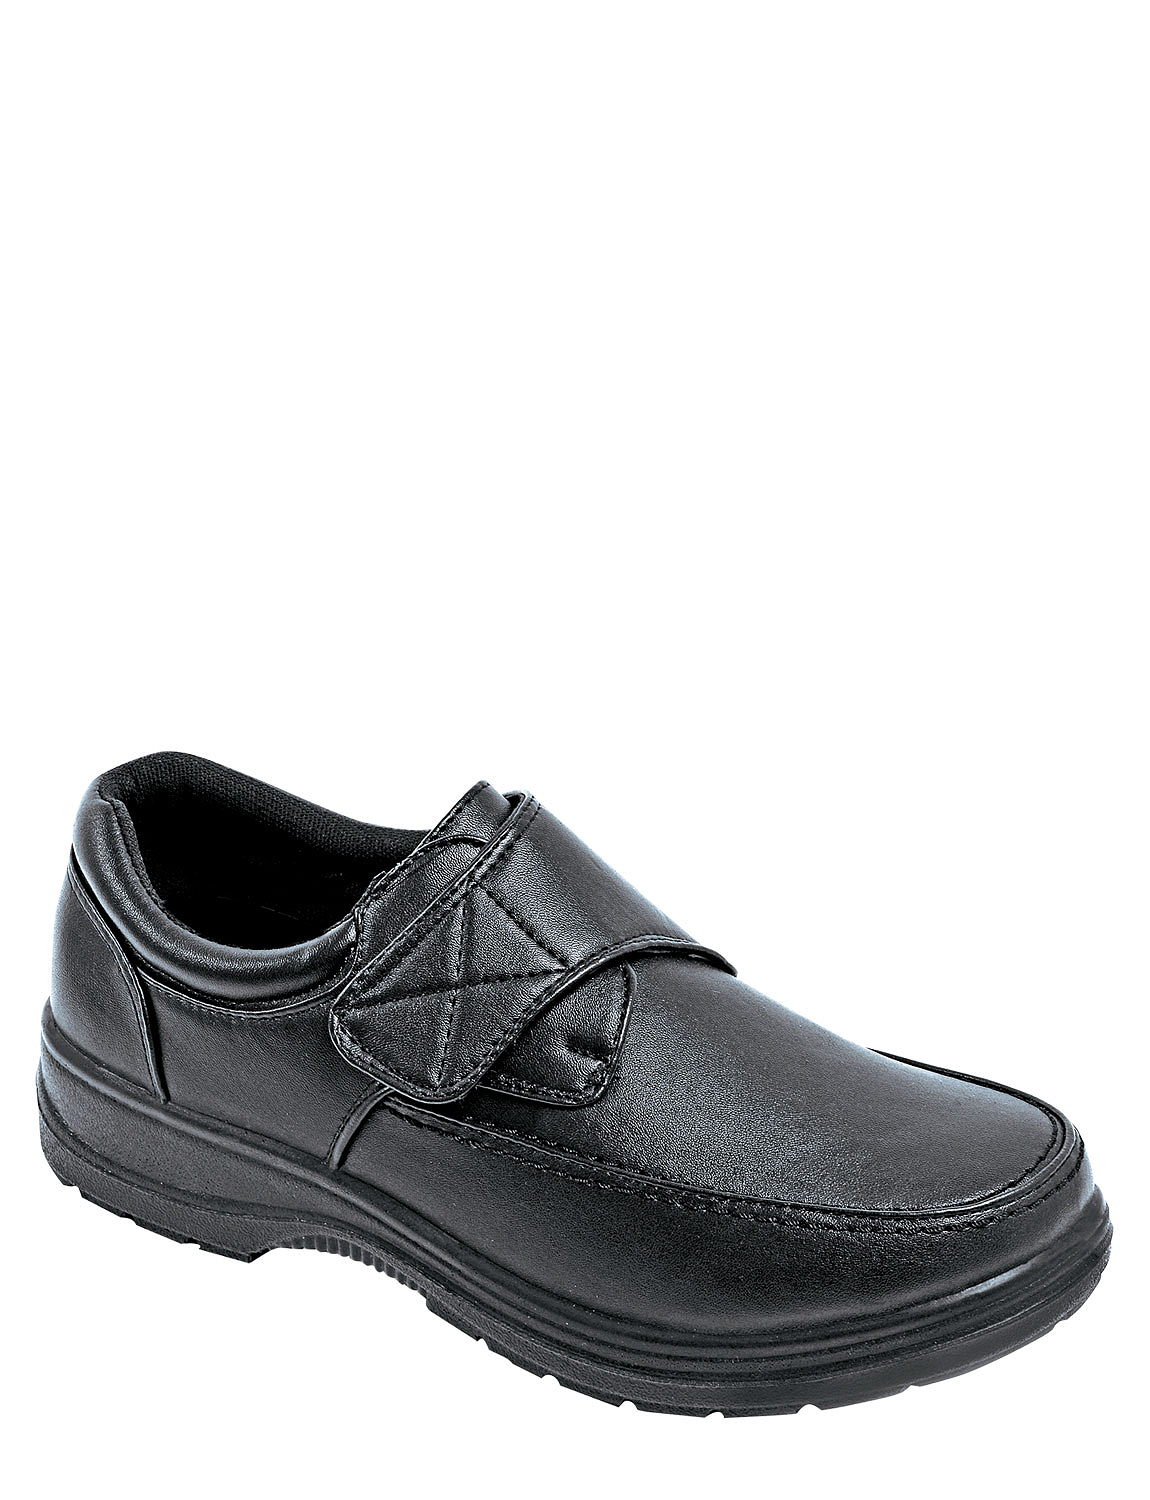 navy flat leather shoes